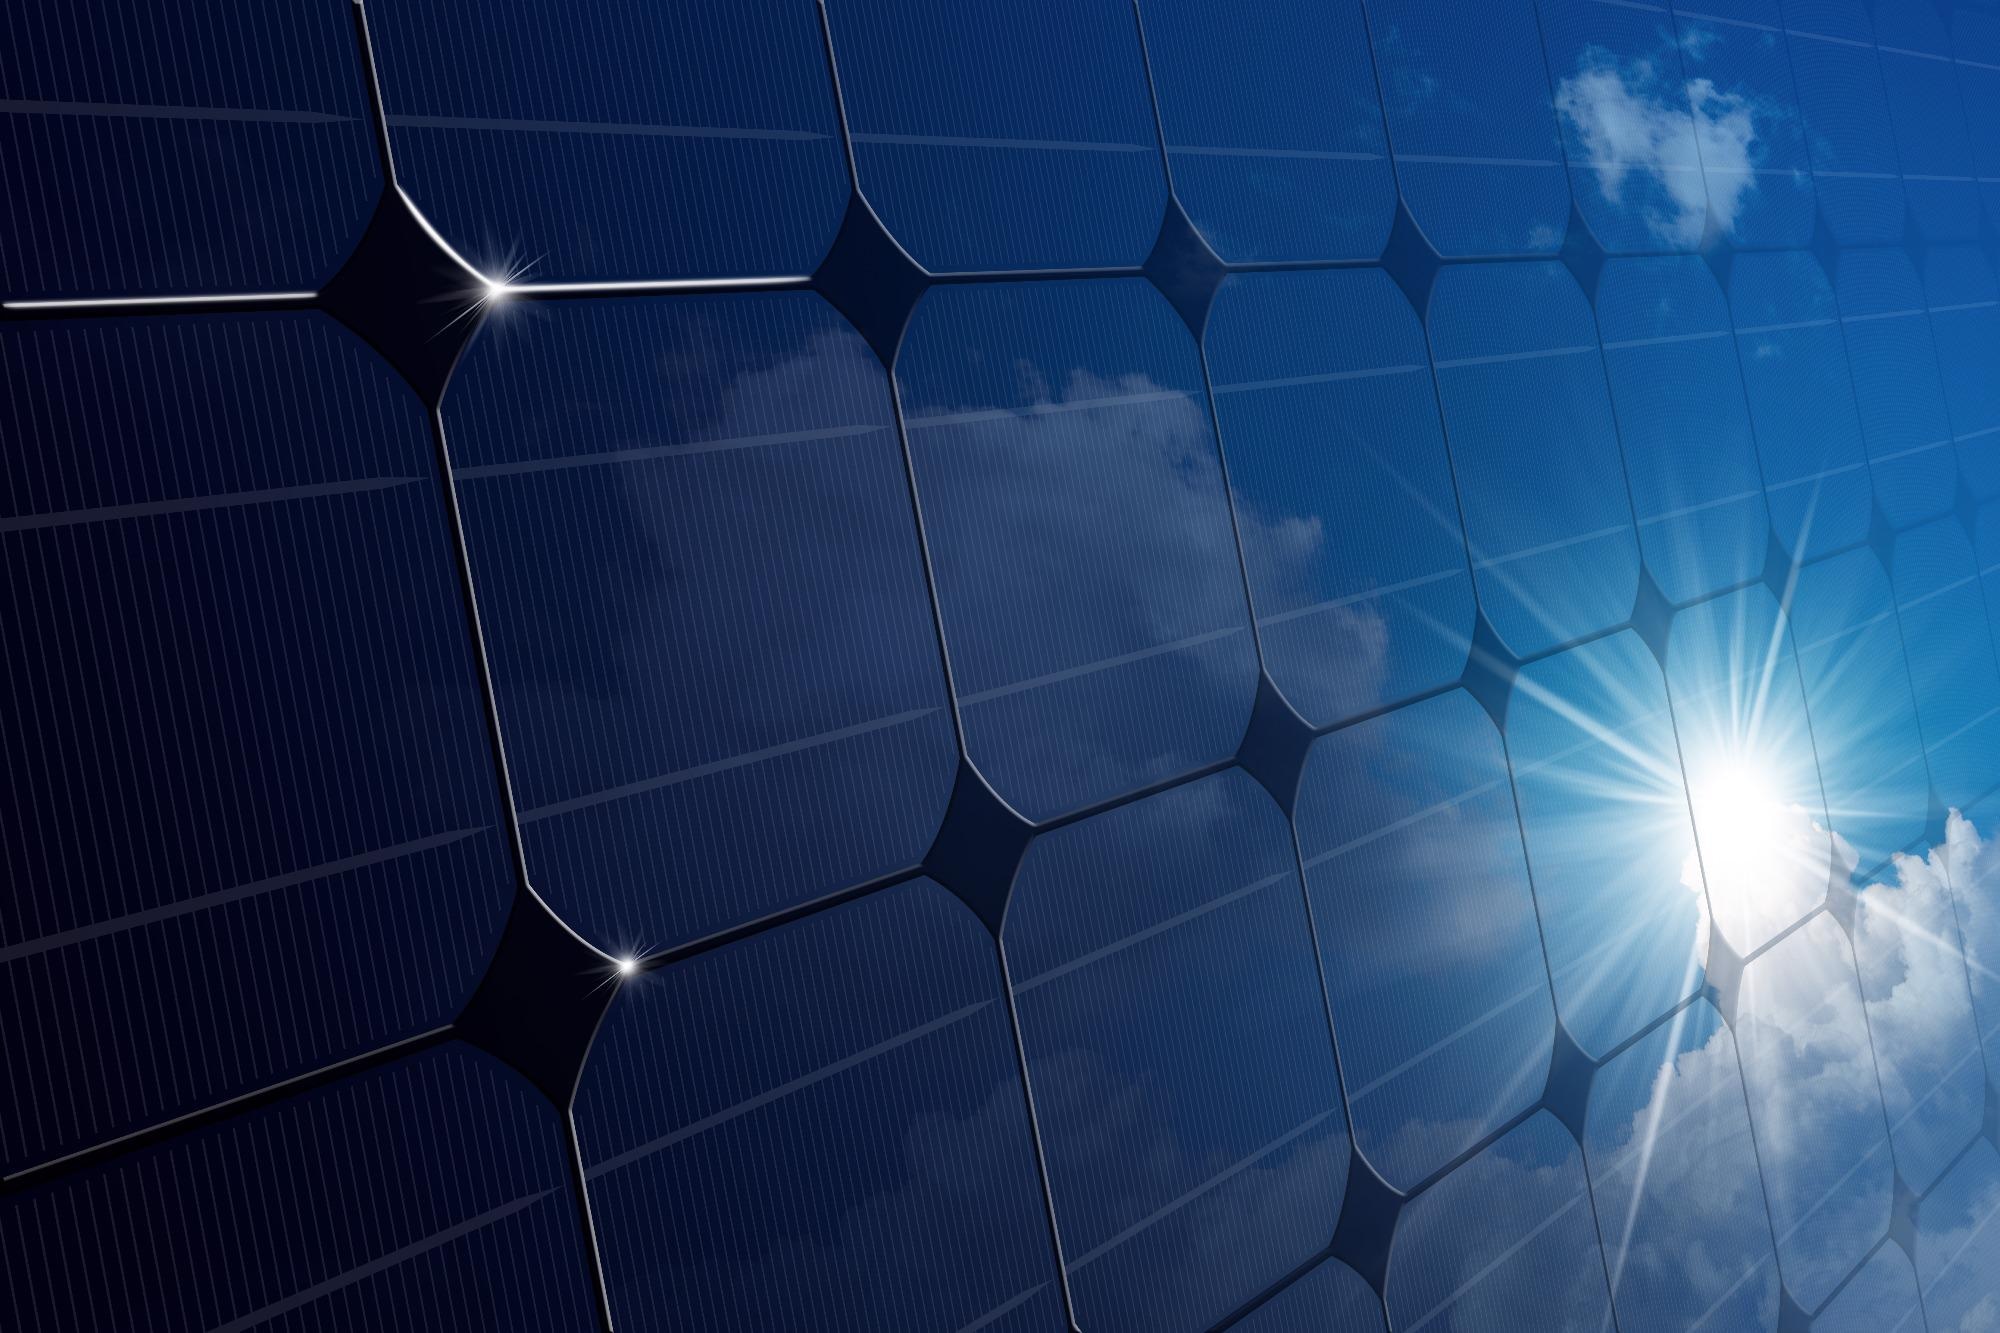 Researchers Investigate Ternary Polymer Solar Cell in Operation.